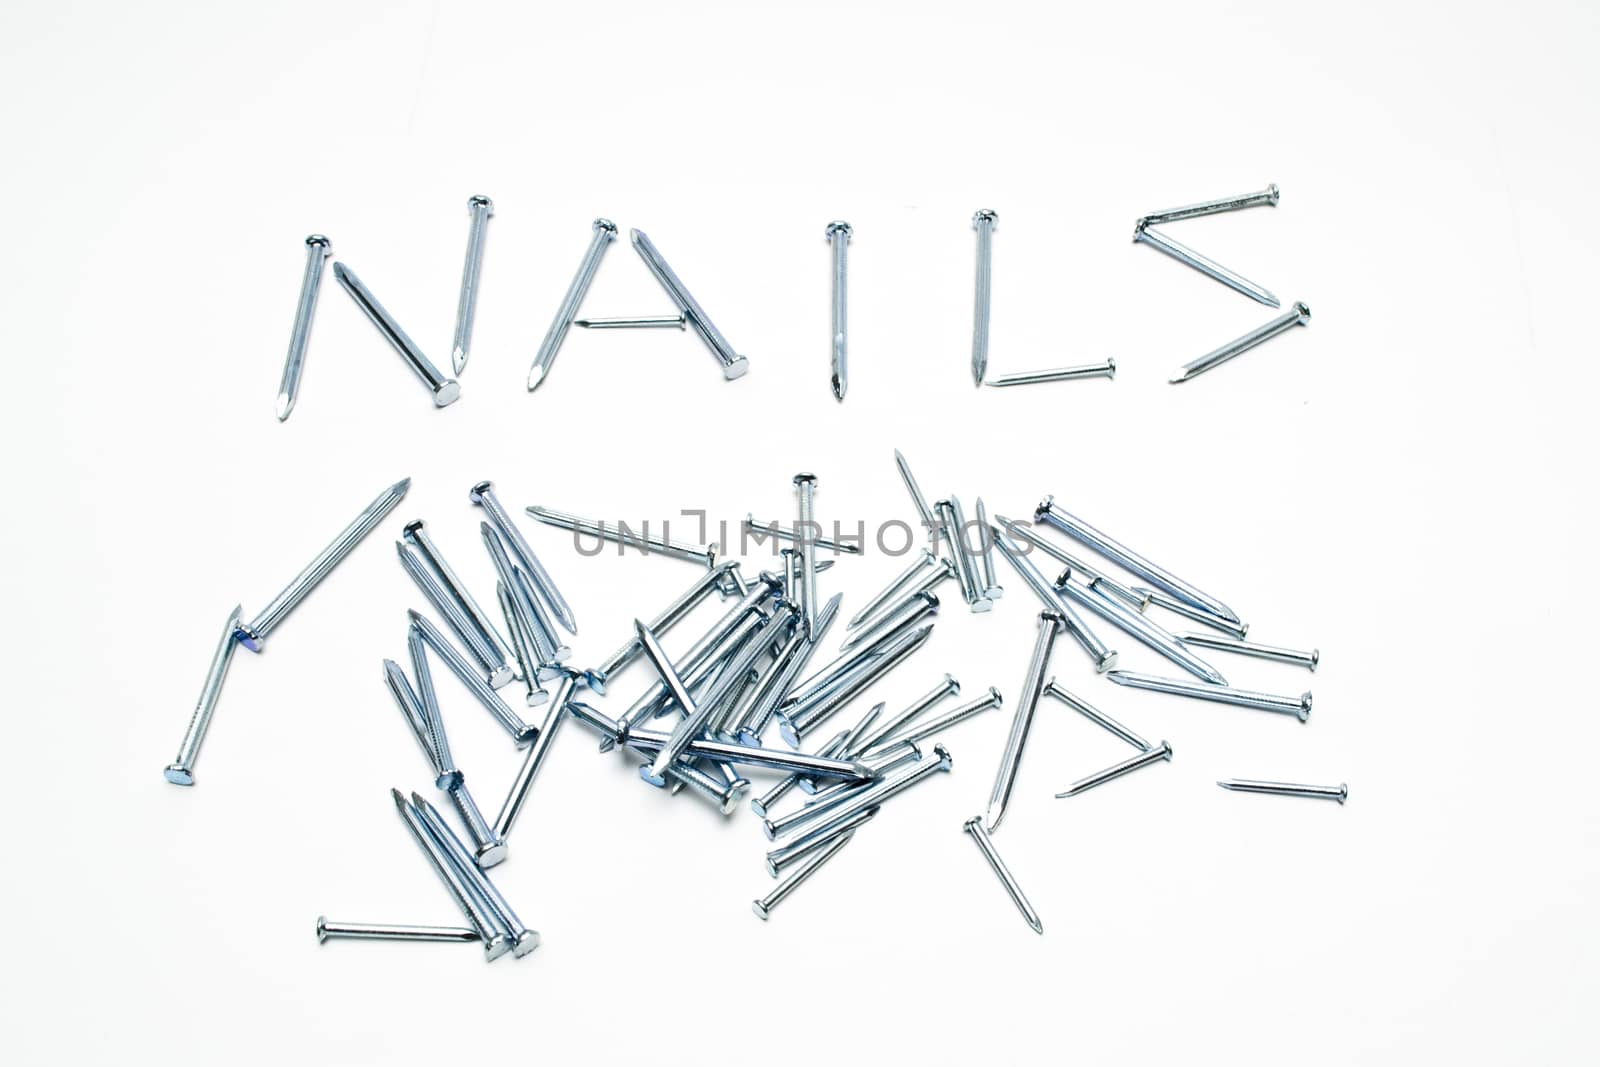 Steel nails with word on a white background